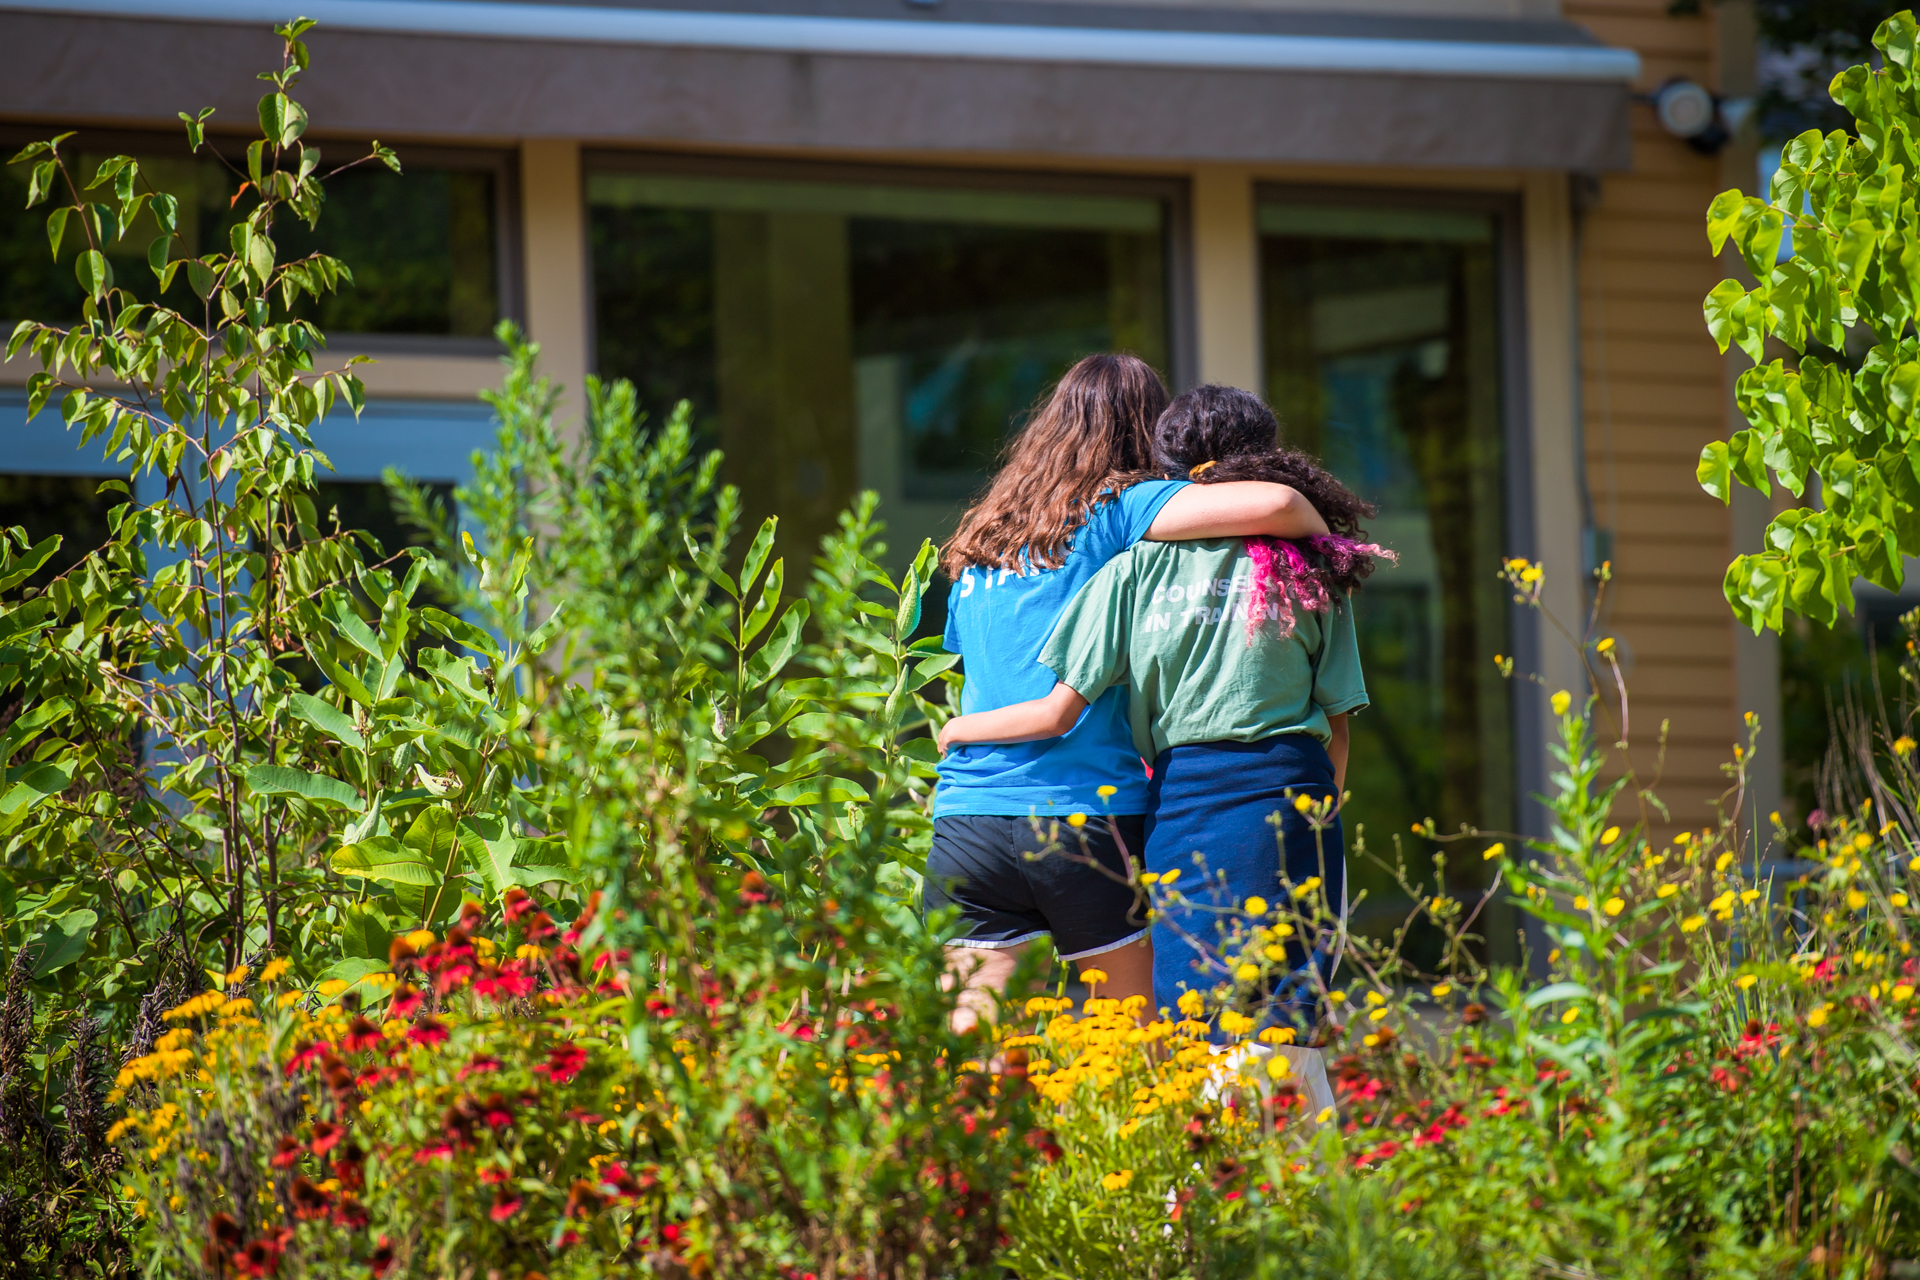 A counselor and CIT with arms around each other walking through the sanctuary's pollinator garden, filled with native wildflowers